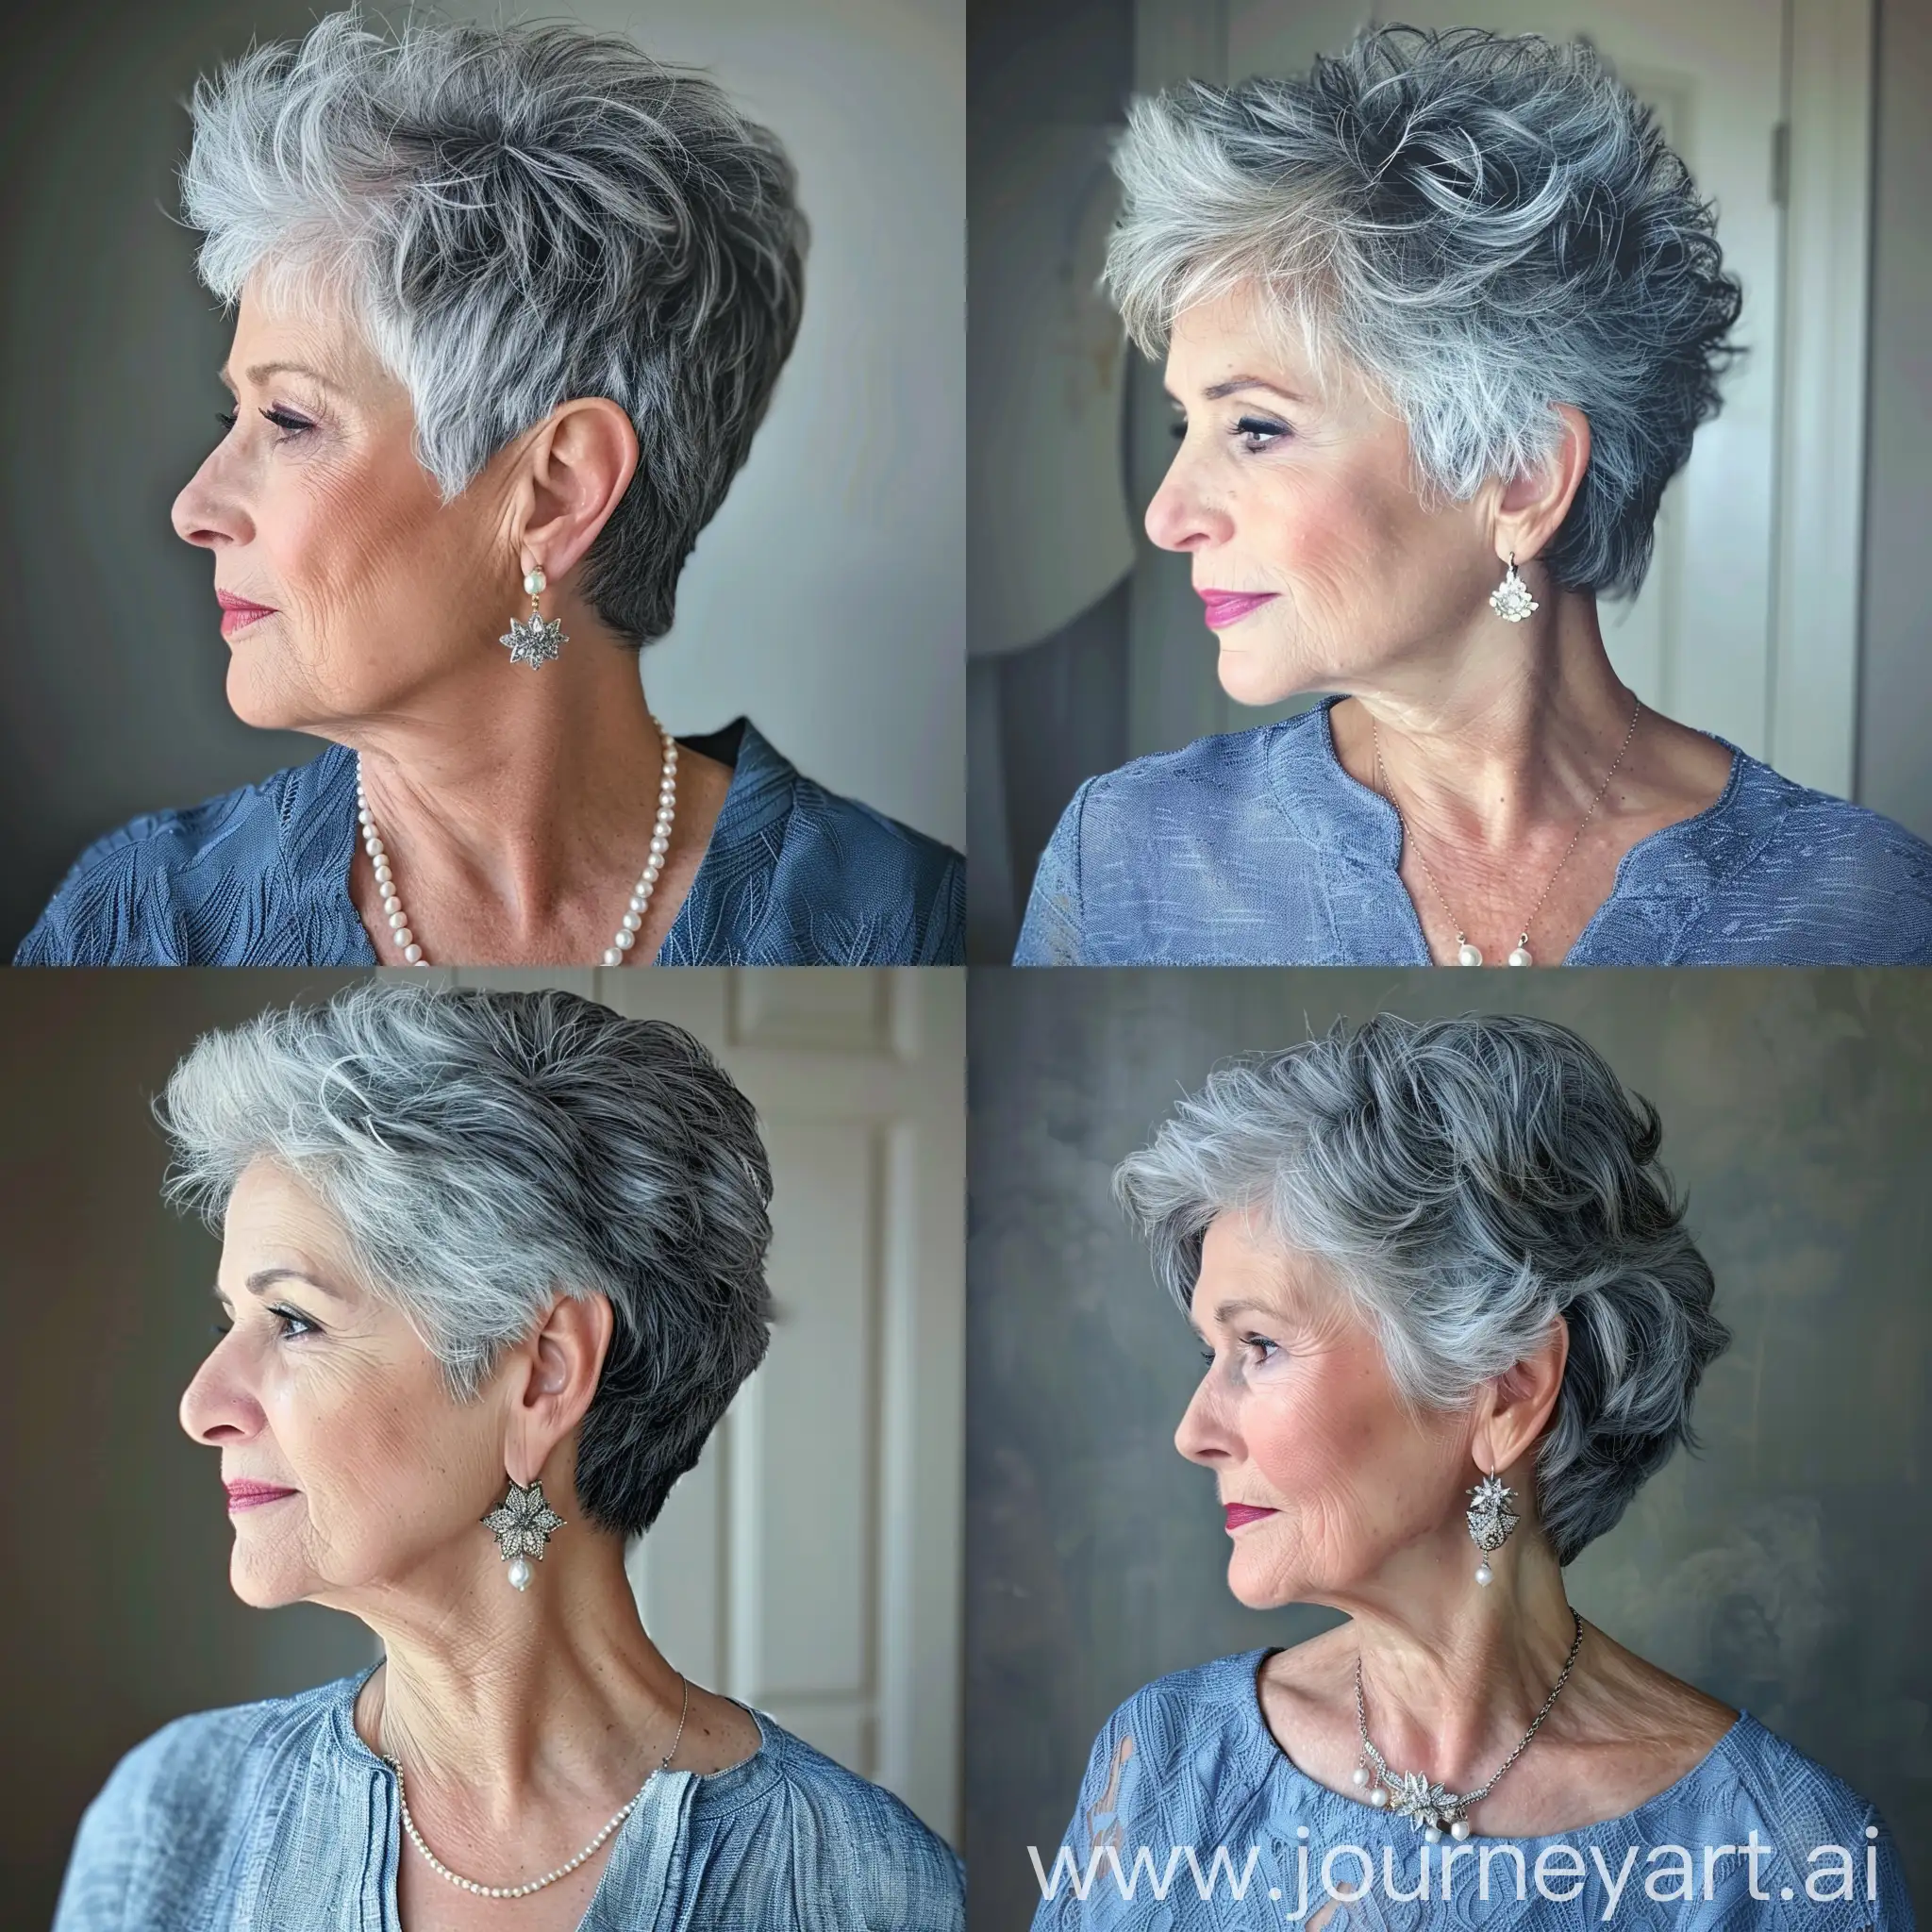 Portrait-of-Elegant-Older-Woman-with-Gray-Hair-and-Vintage-Accessories